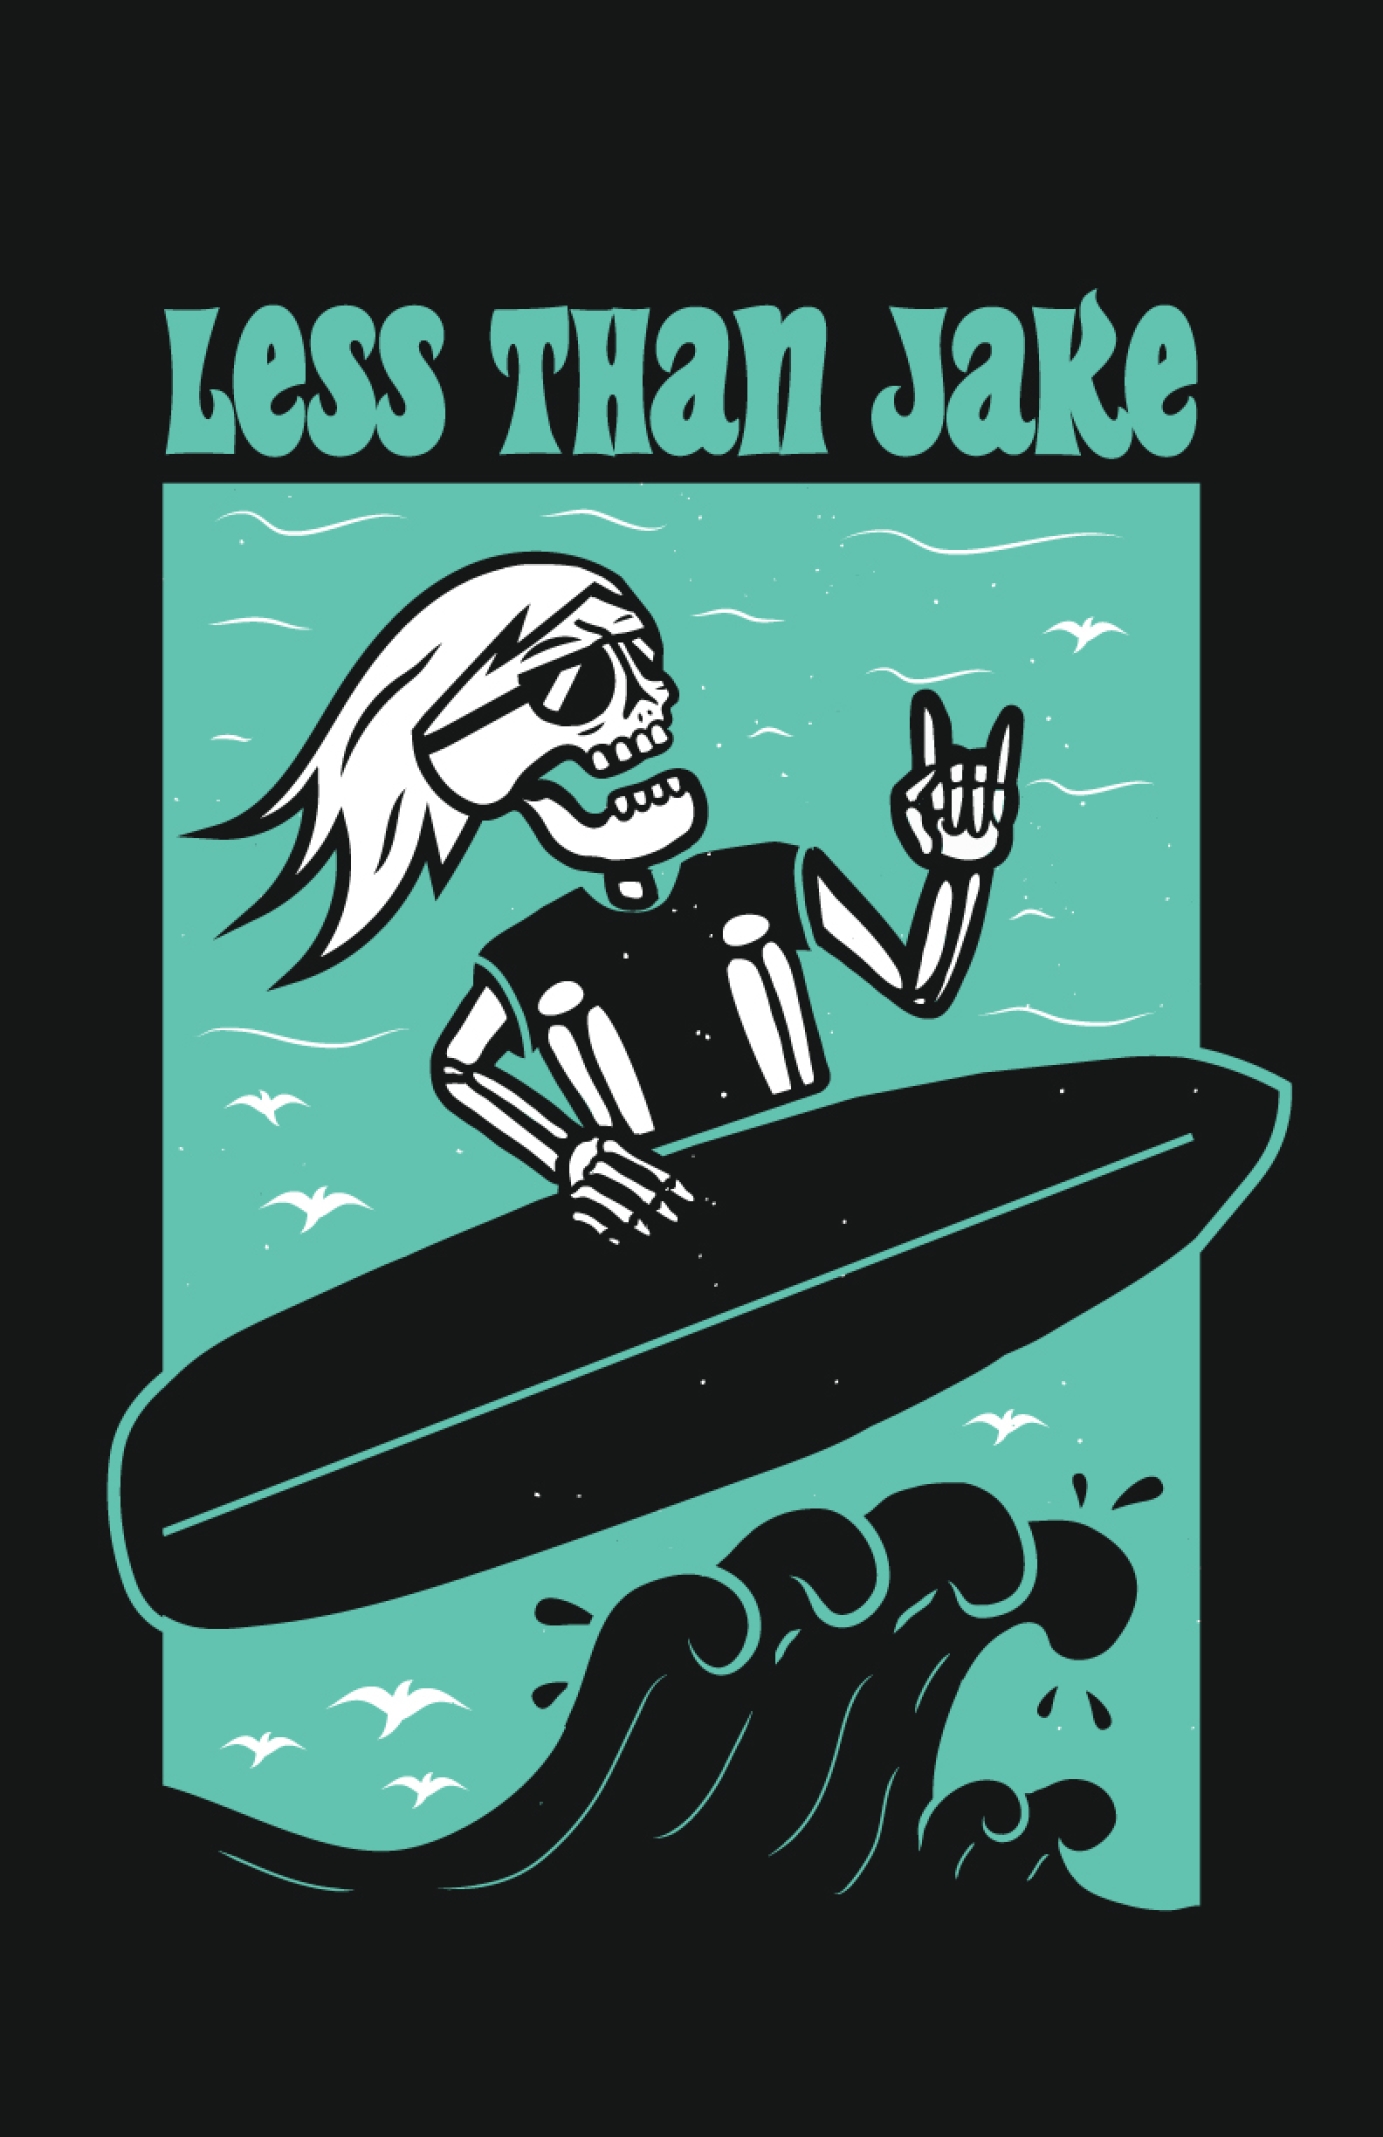 Merchandise for Less Than Jake by cpodish